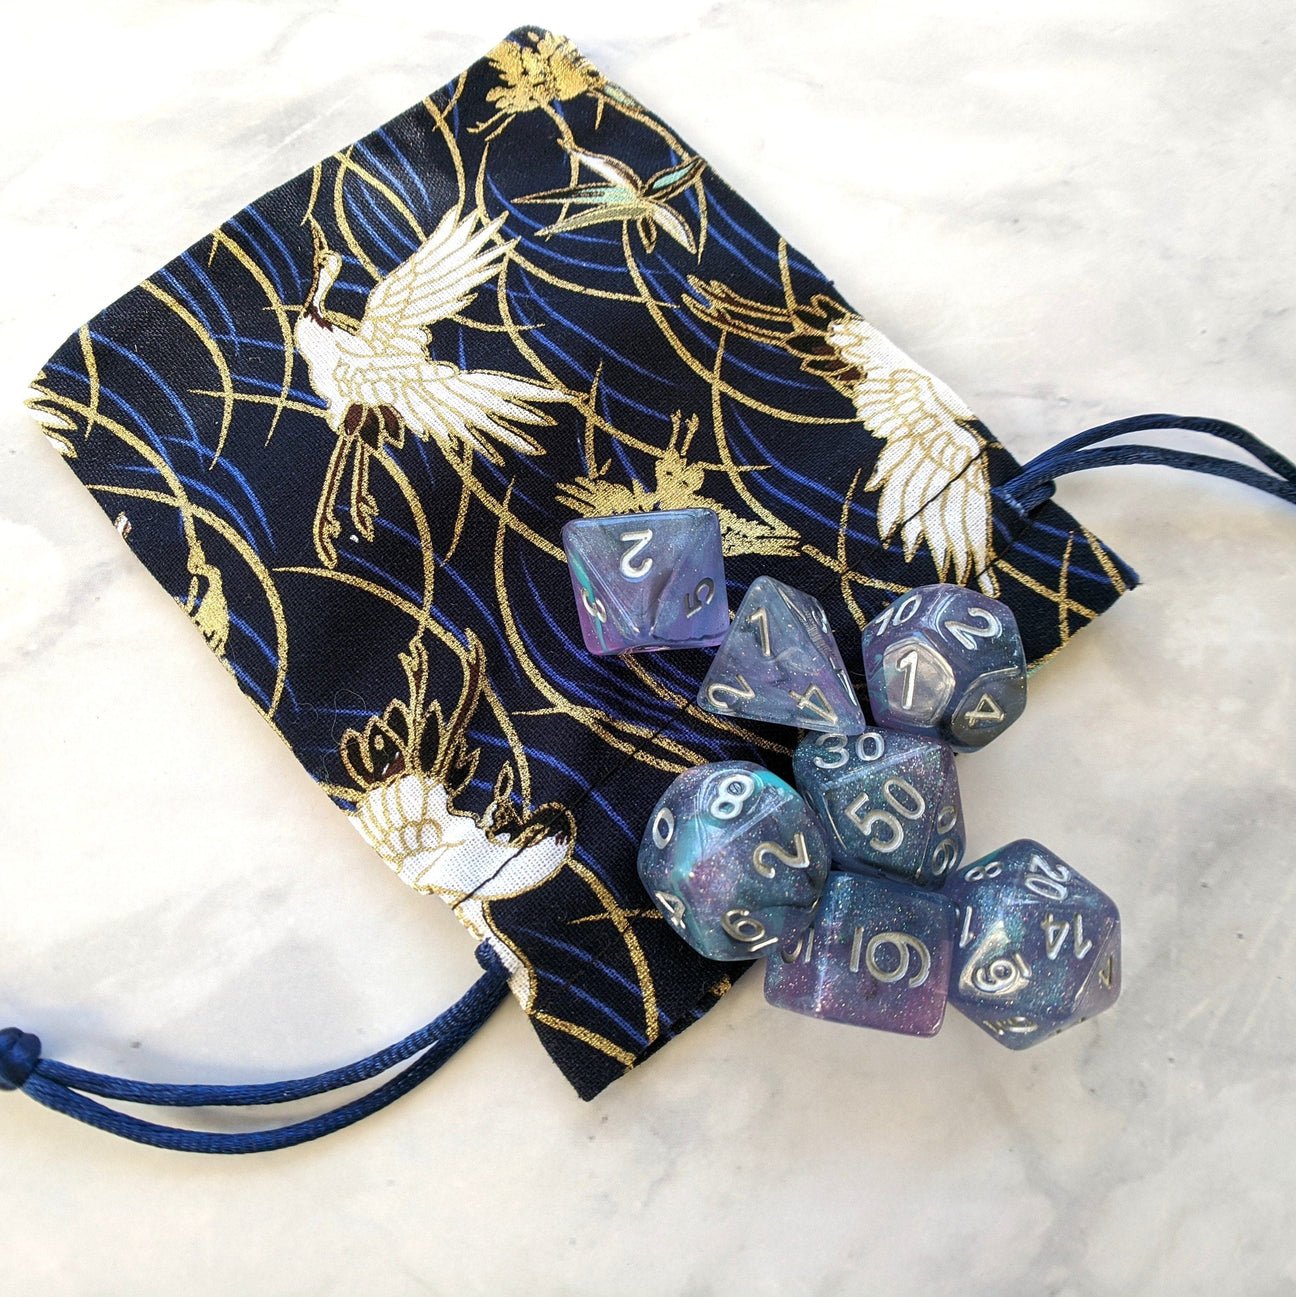 White Crane Dice Bag - The Fourth Place